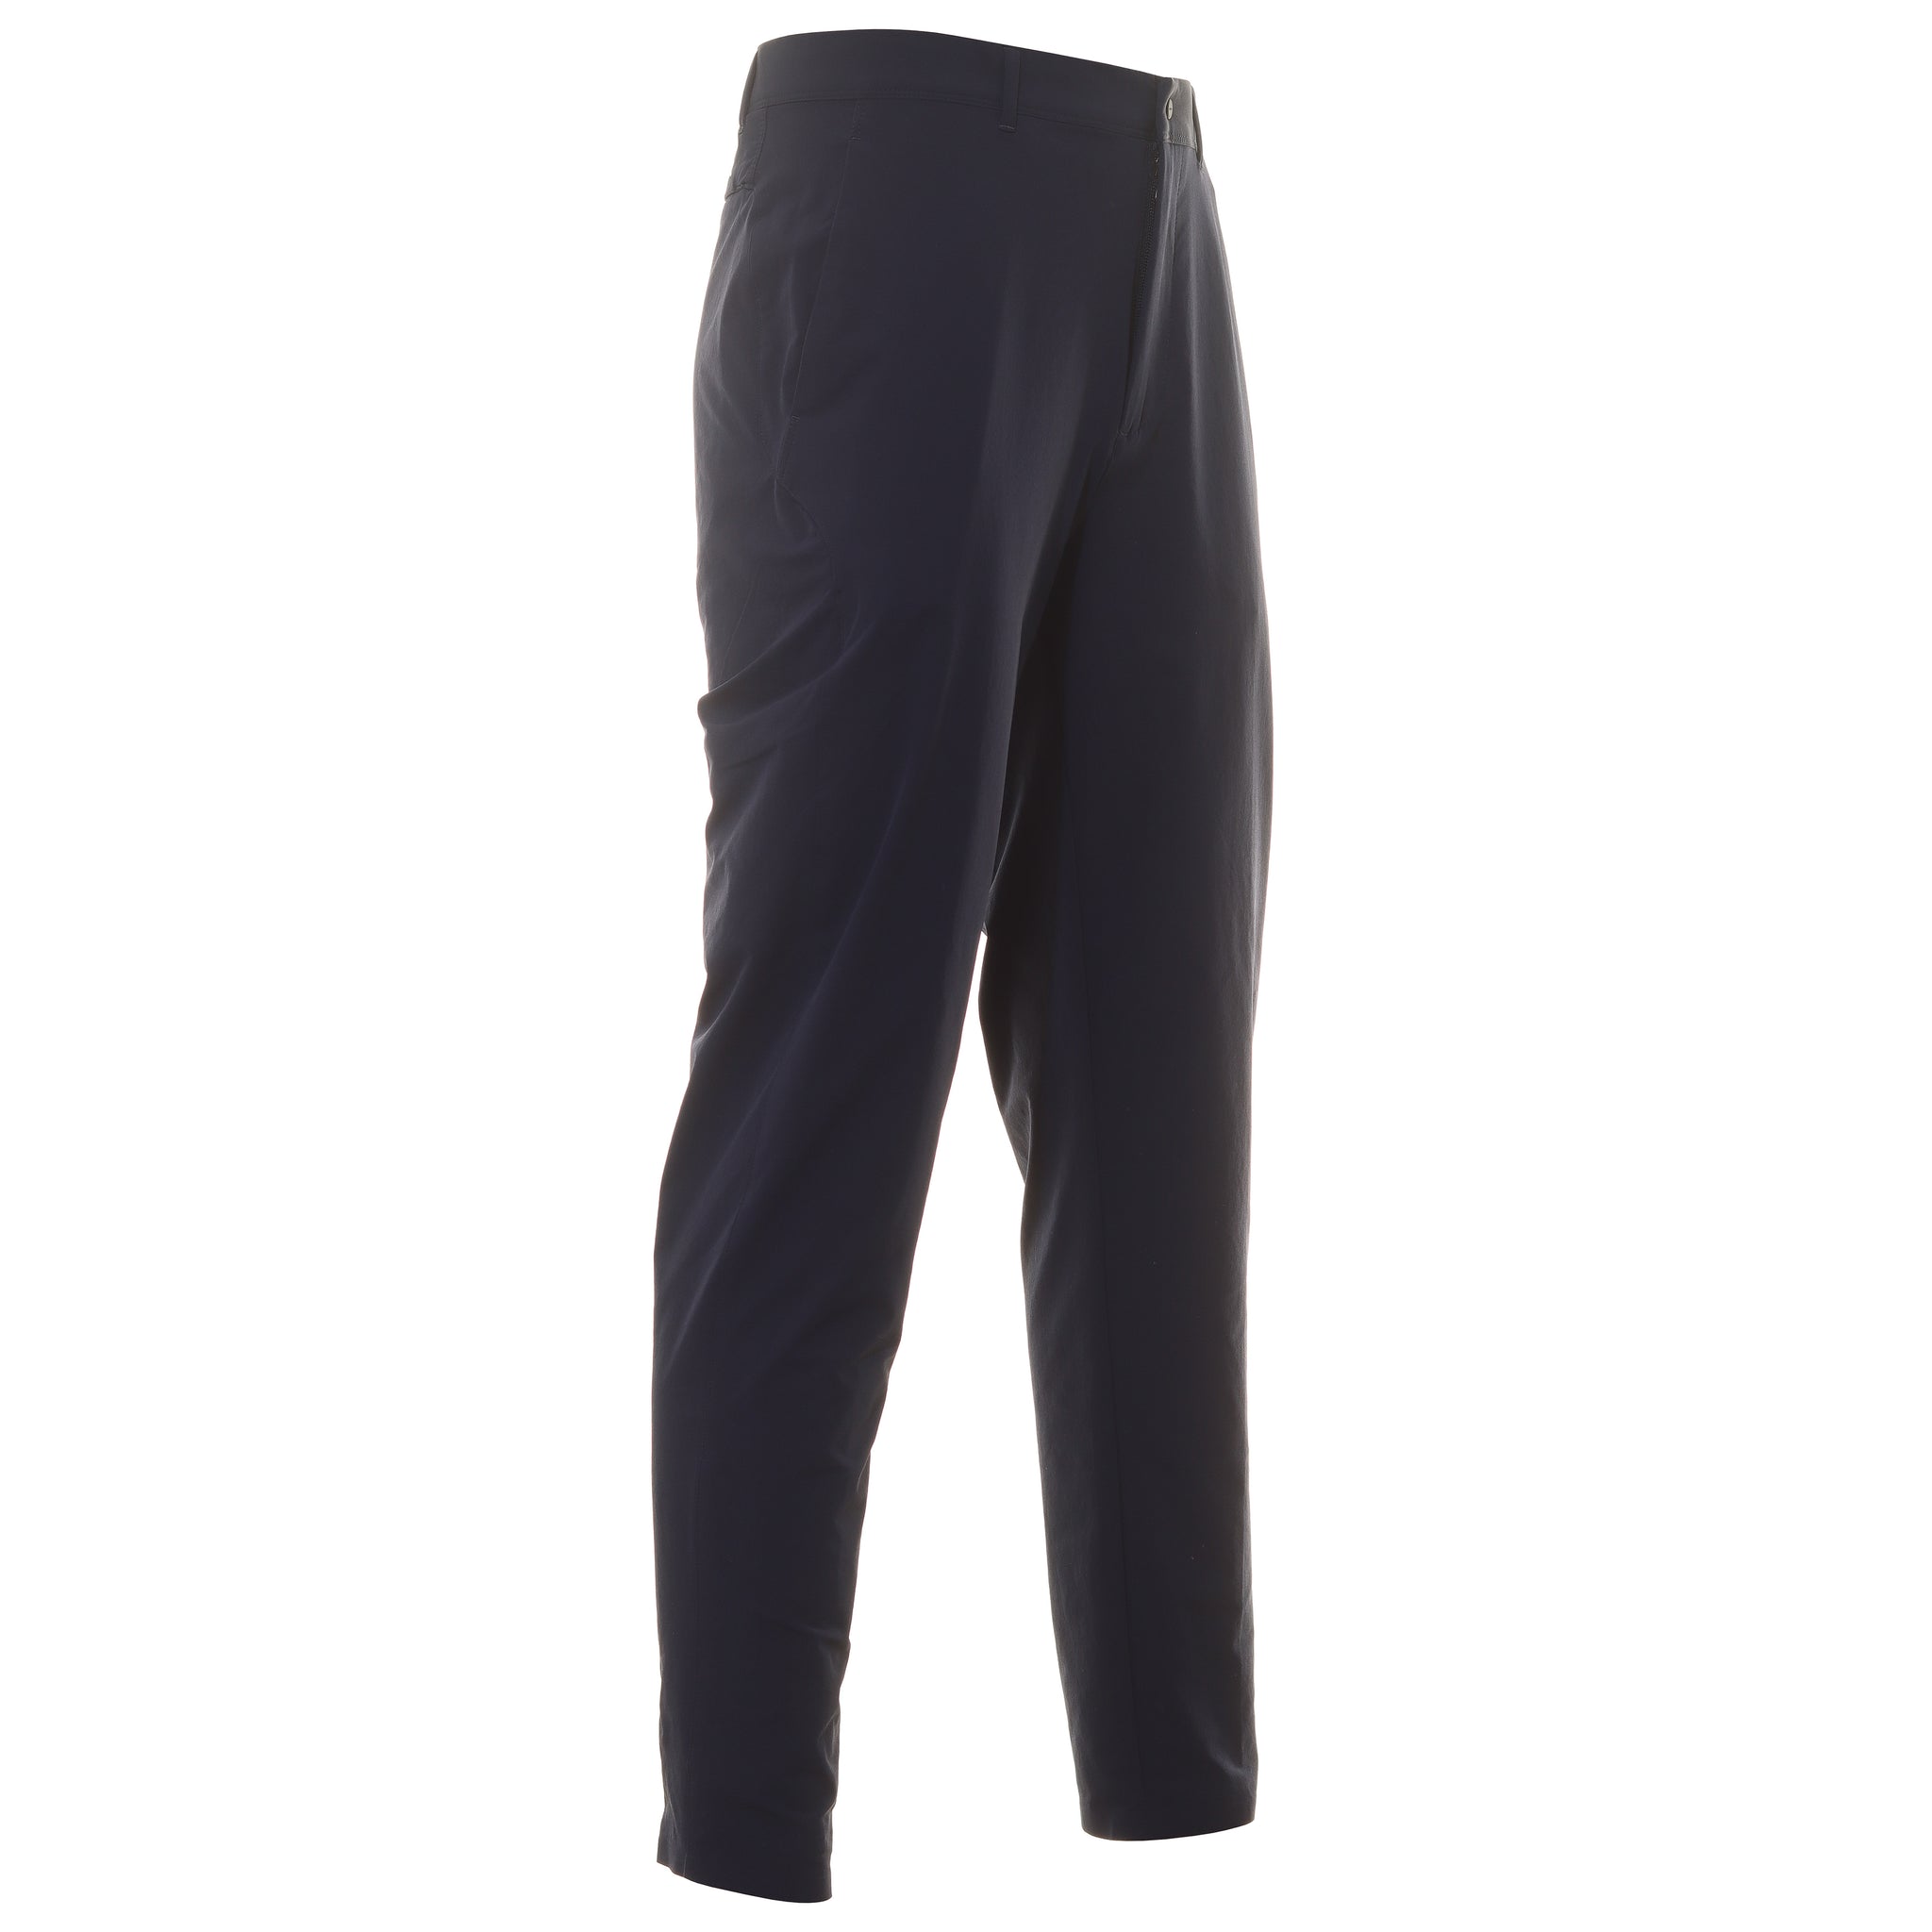 rlx-ralph-lauren-on-course-trousers-785915686-refined-navy-003